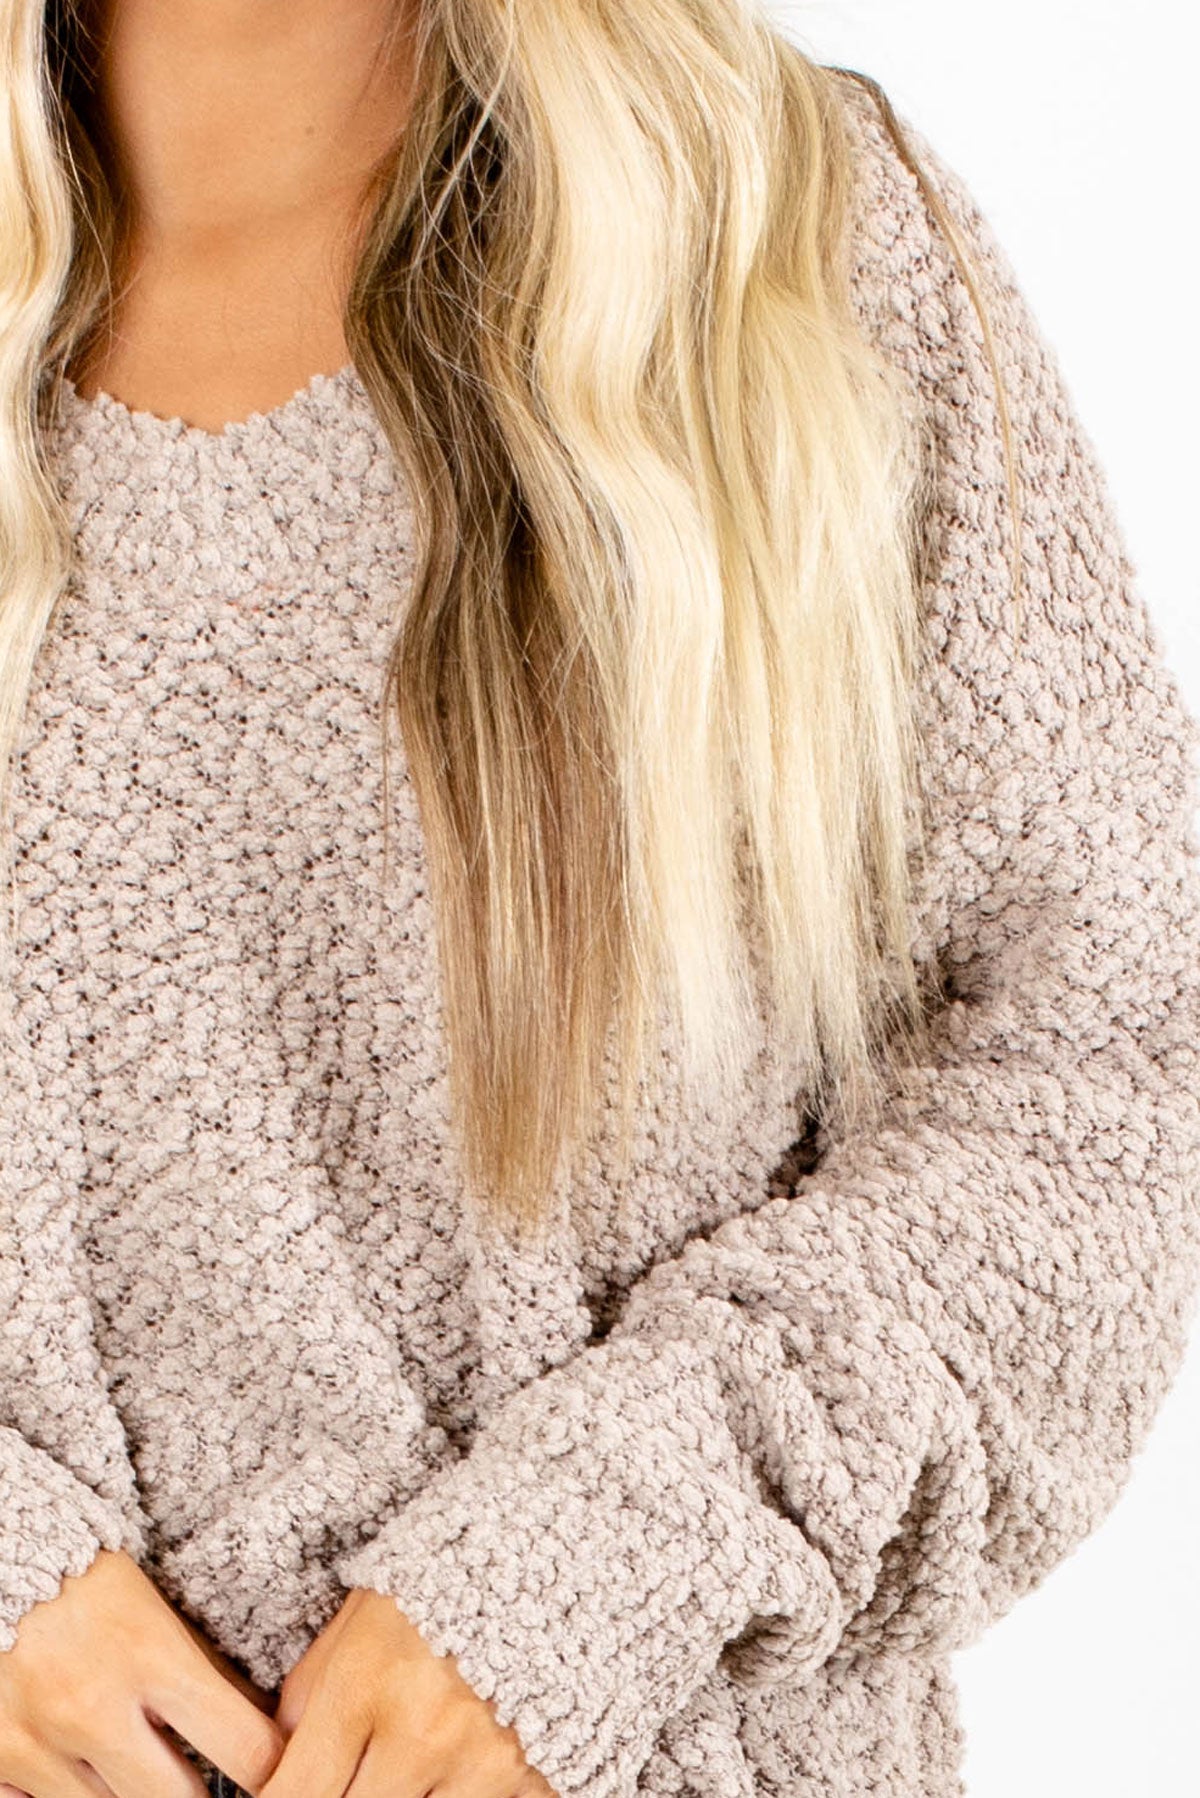 Tan Popcorn Knit Material Boutique Sweater for Women